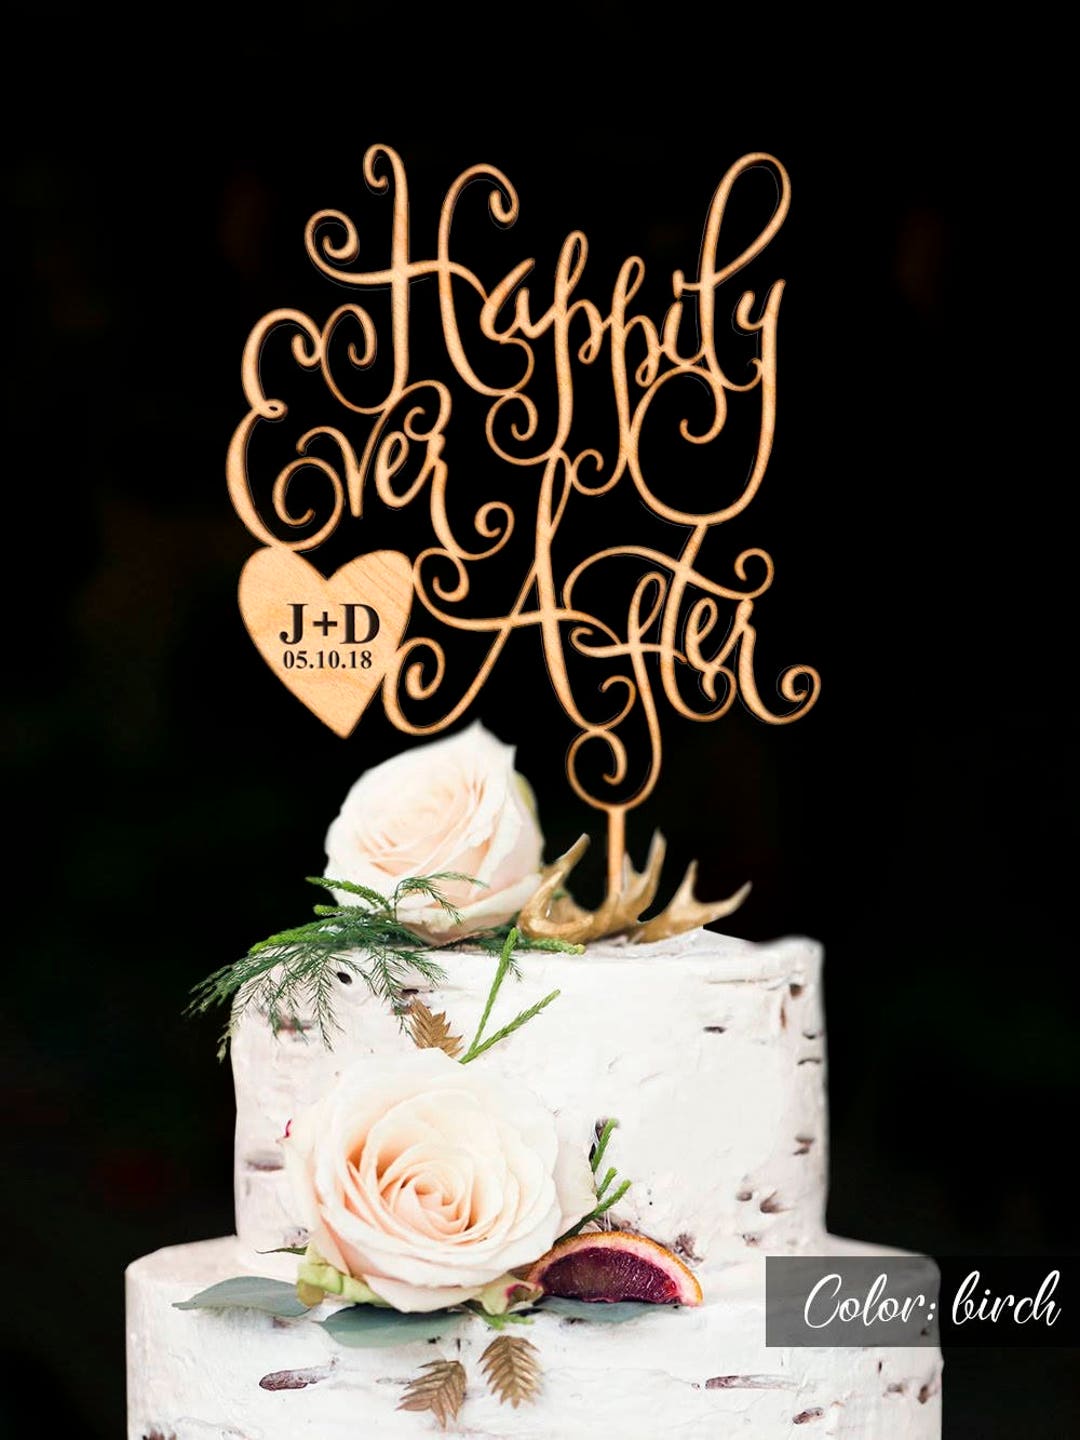 Happily Ever After Wedding Cake Topper. Engraved Initials of the Bride and  Groom and Wedding Date.rustic Personalized Wedding Cake Topper 